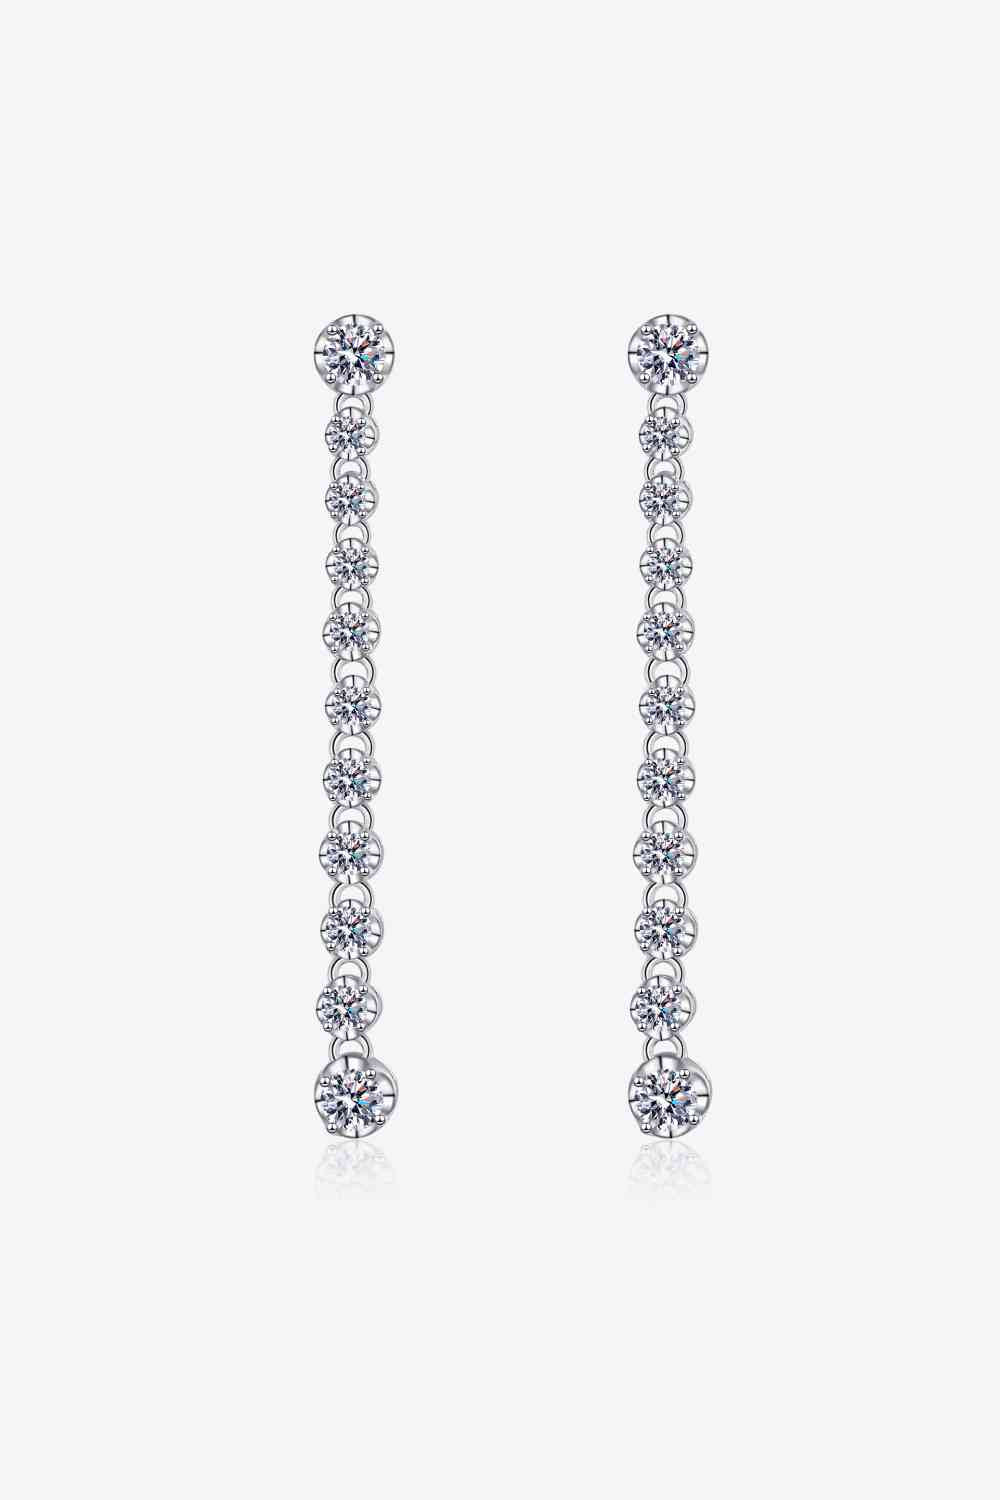 Adored 1.18 Carat Moissanite Long Earrings - Everyday-Sales.com